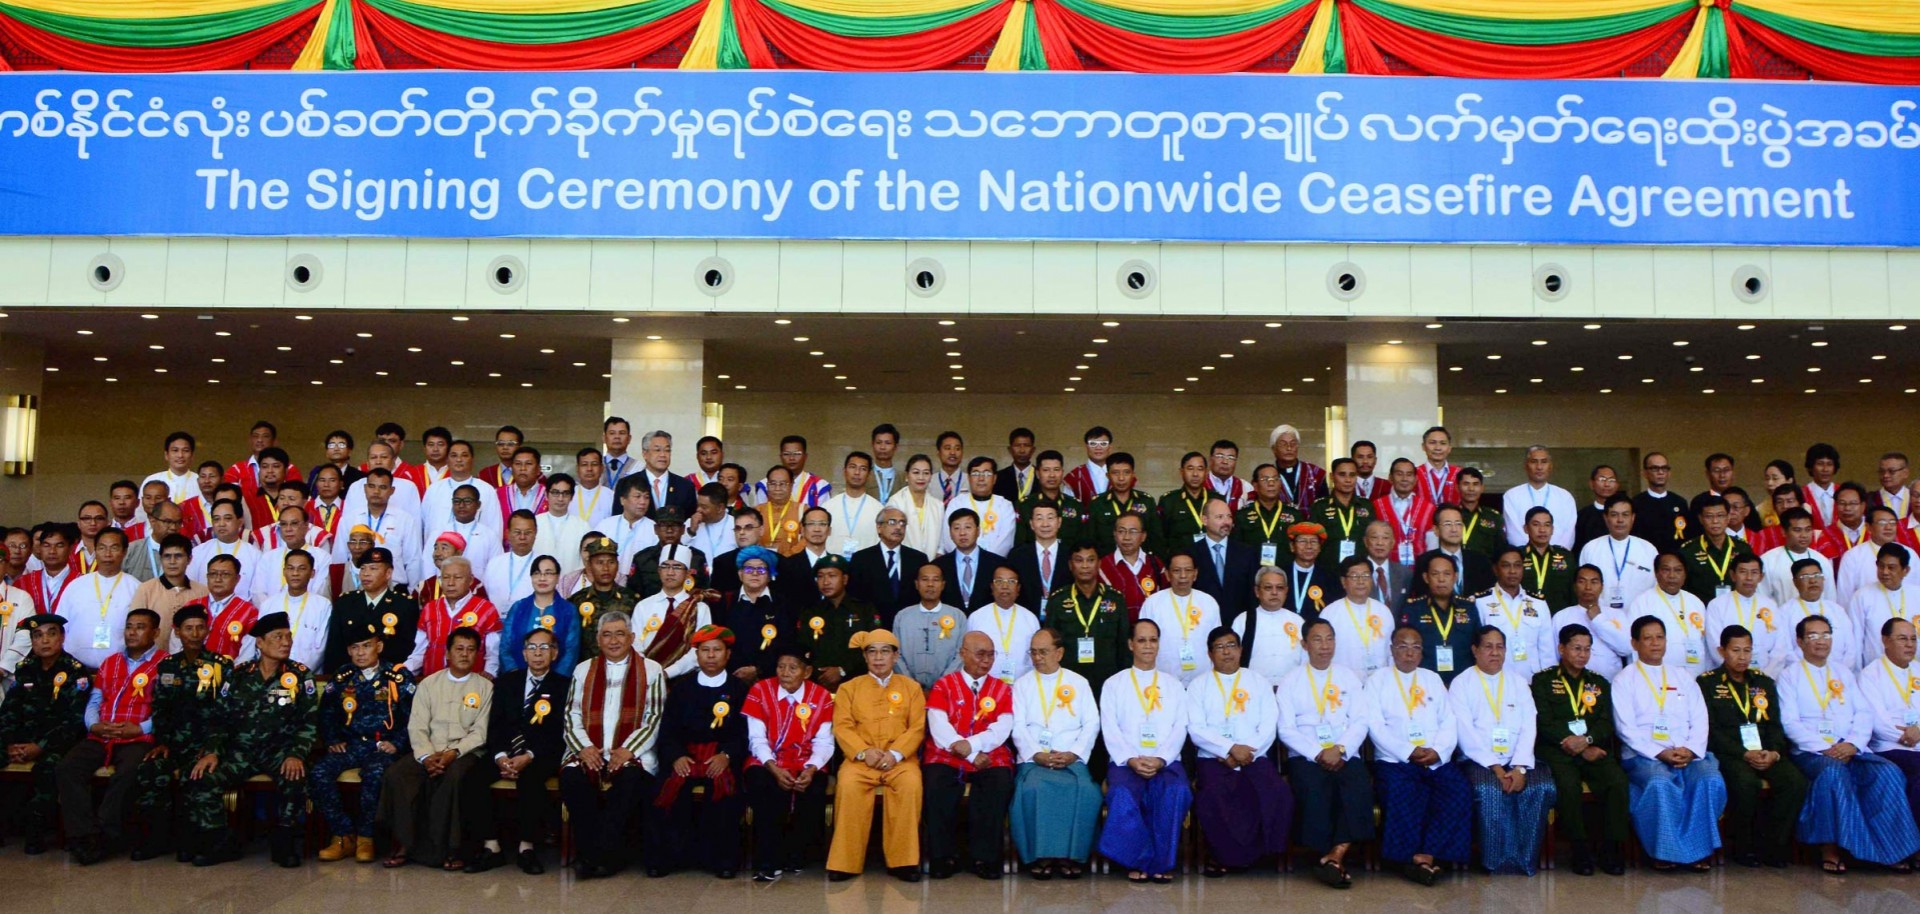 Only two of Myanmar's major ethnic militias signed the Nationwide Ceasefire Agreement in 2015, blunting the country's efforts to end decades of insurgency.